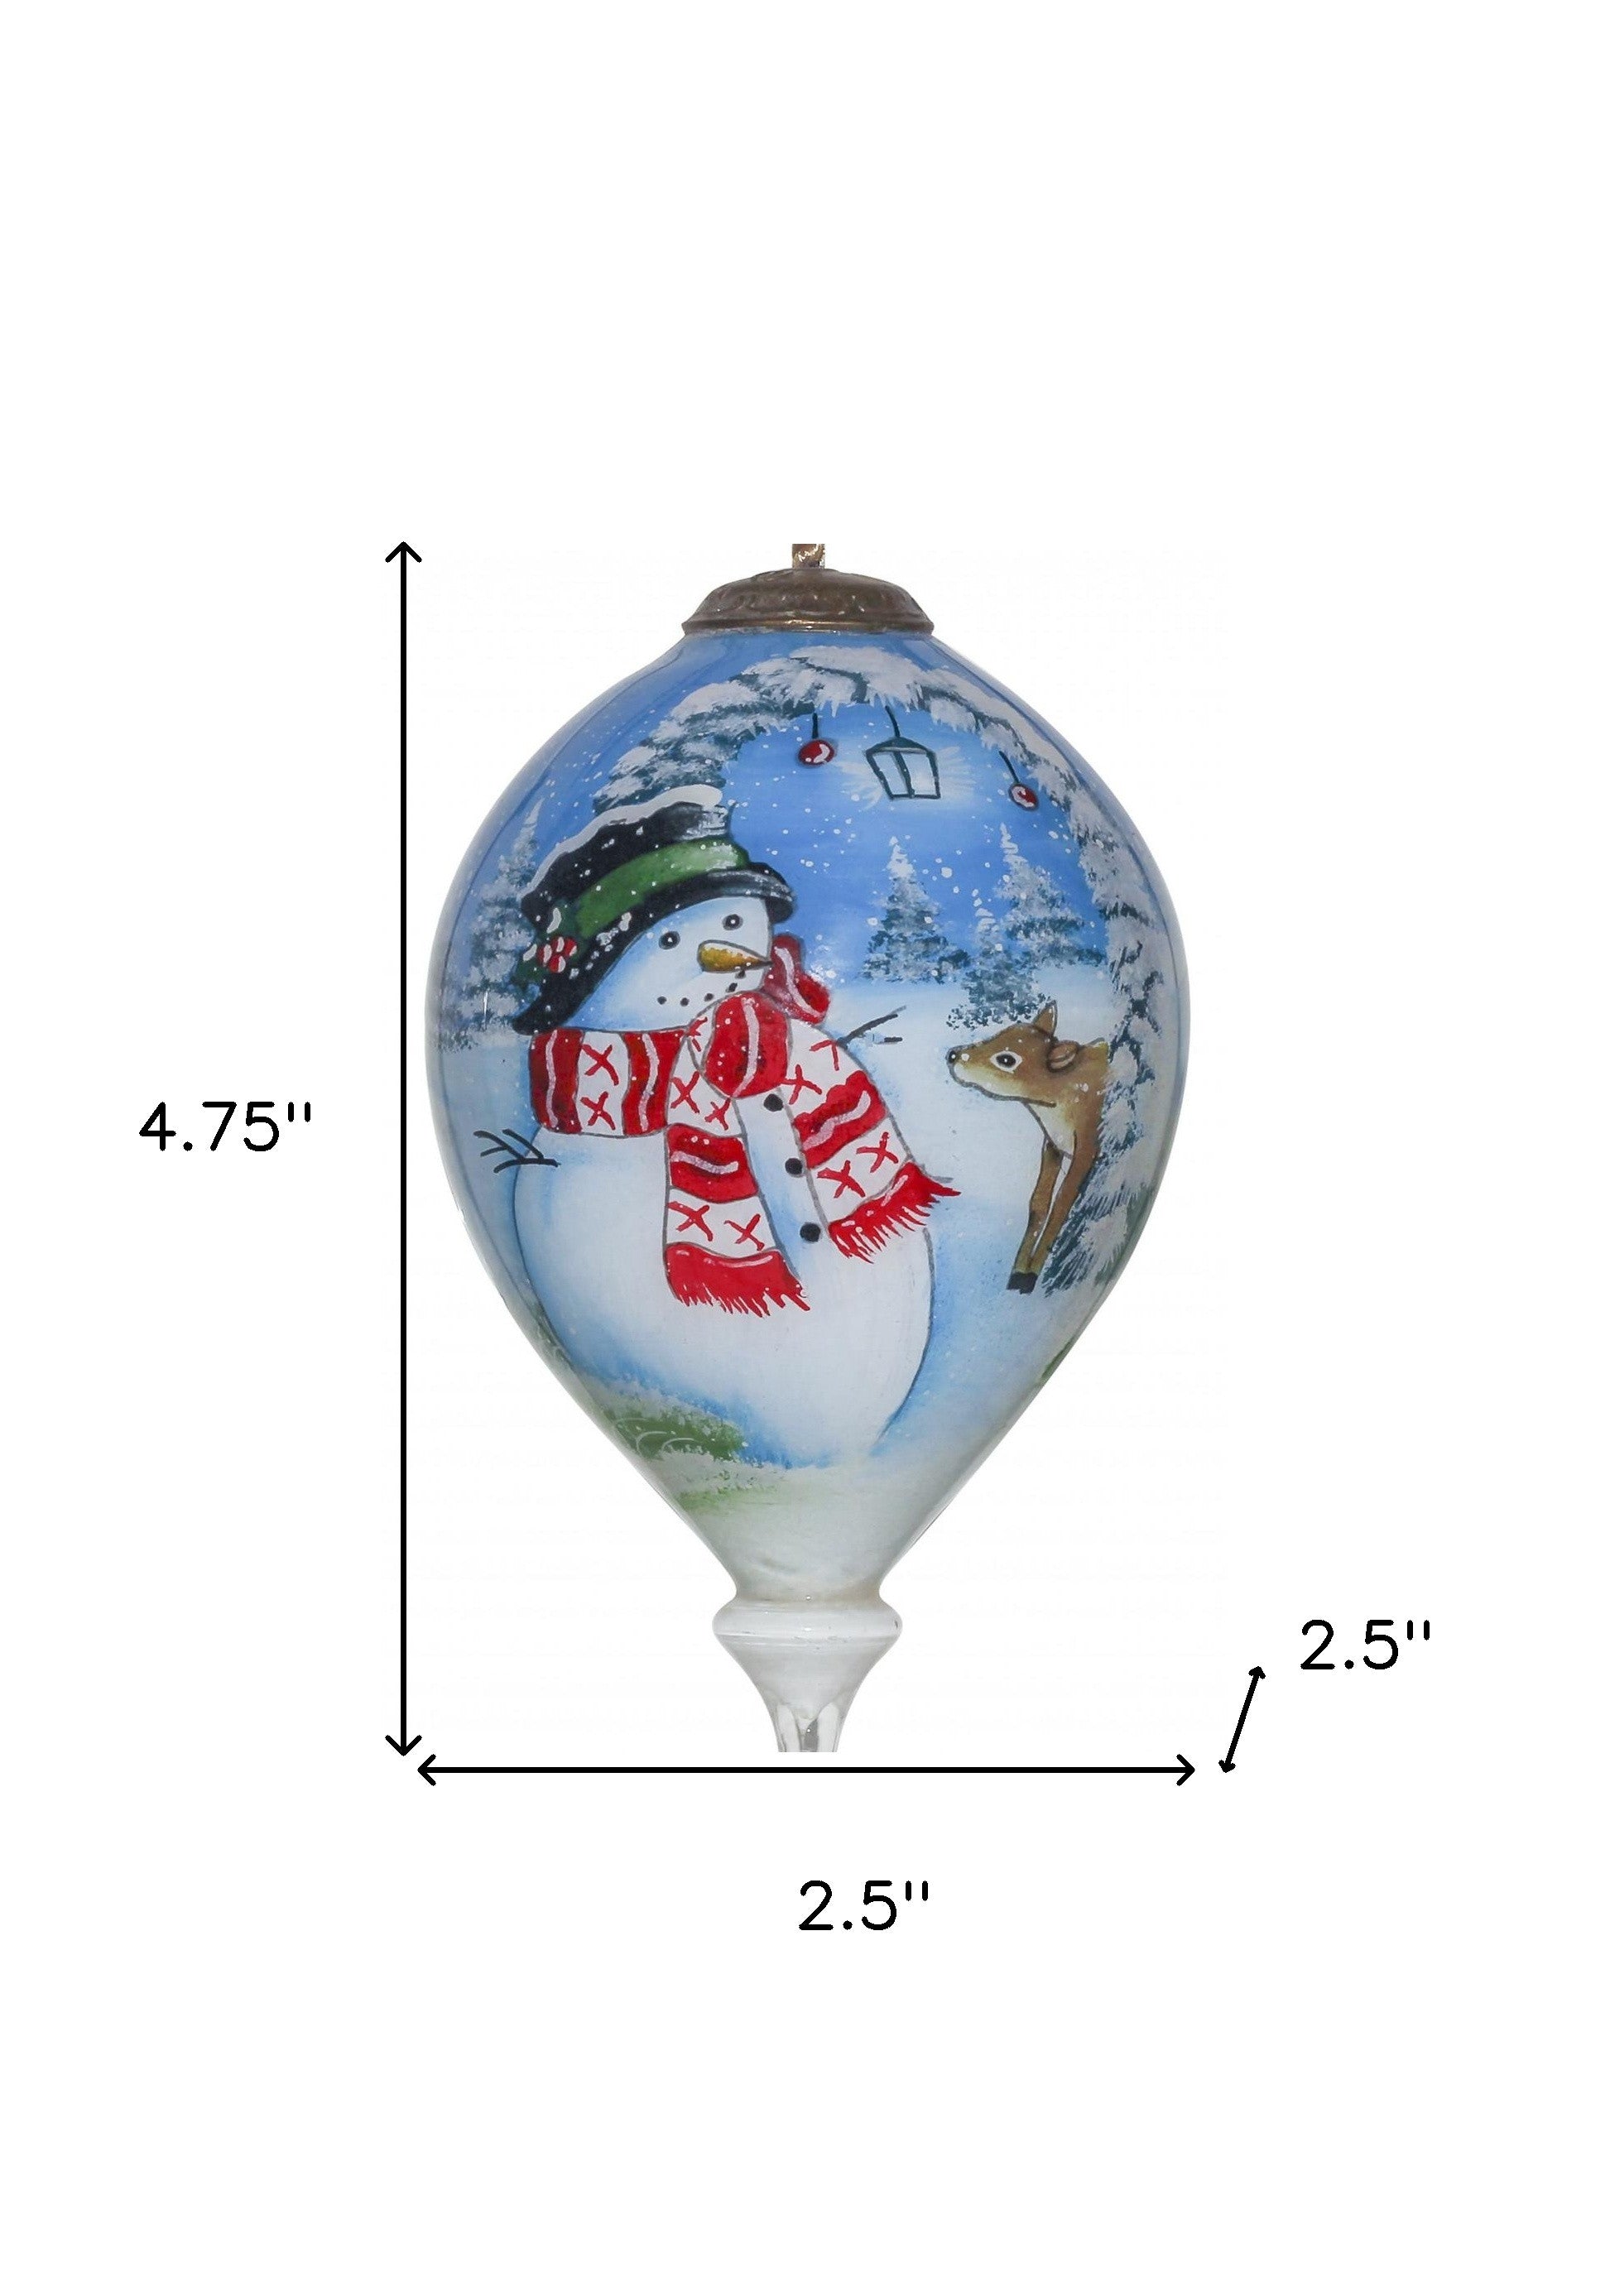 Adorable Snowman and Deer Hand Painted Mouth Blown Glass Ornament